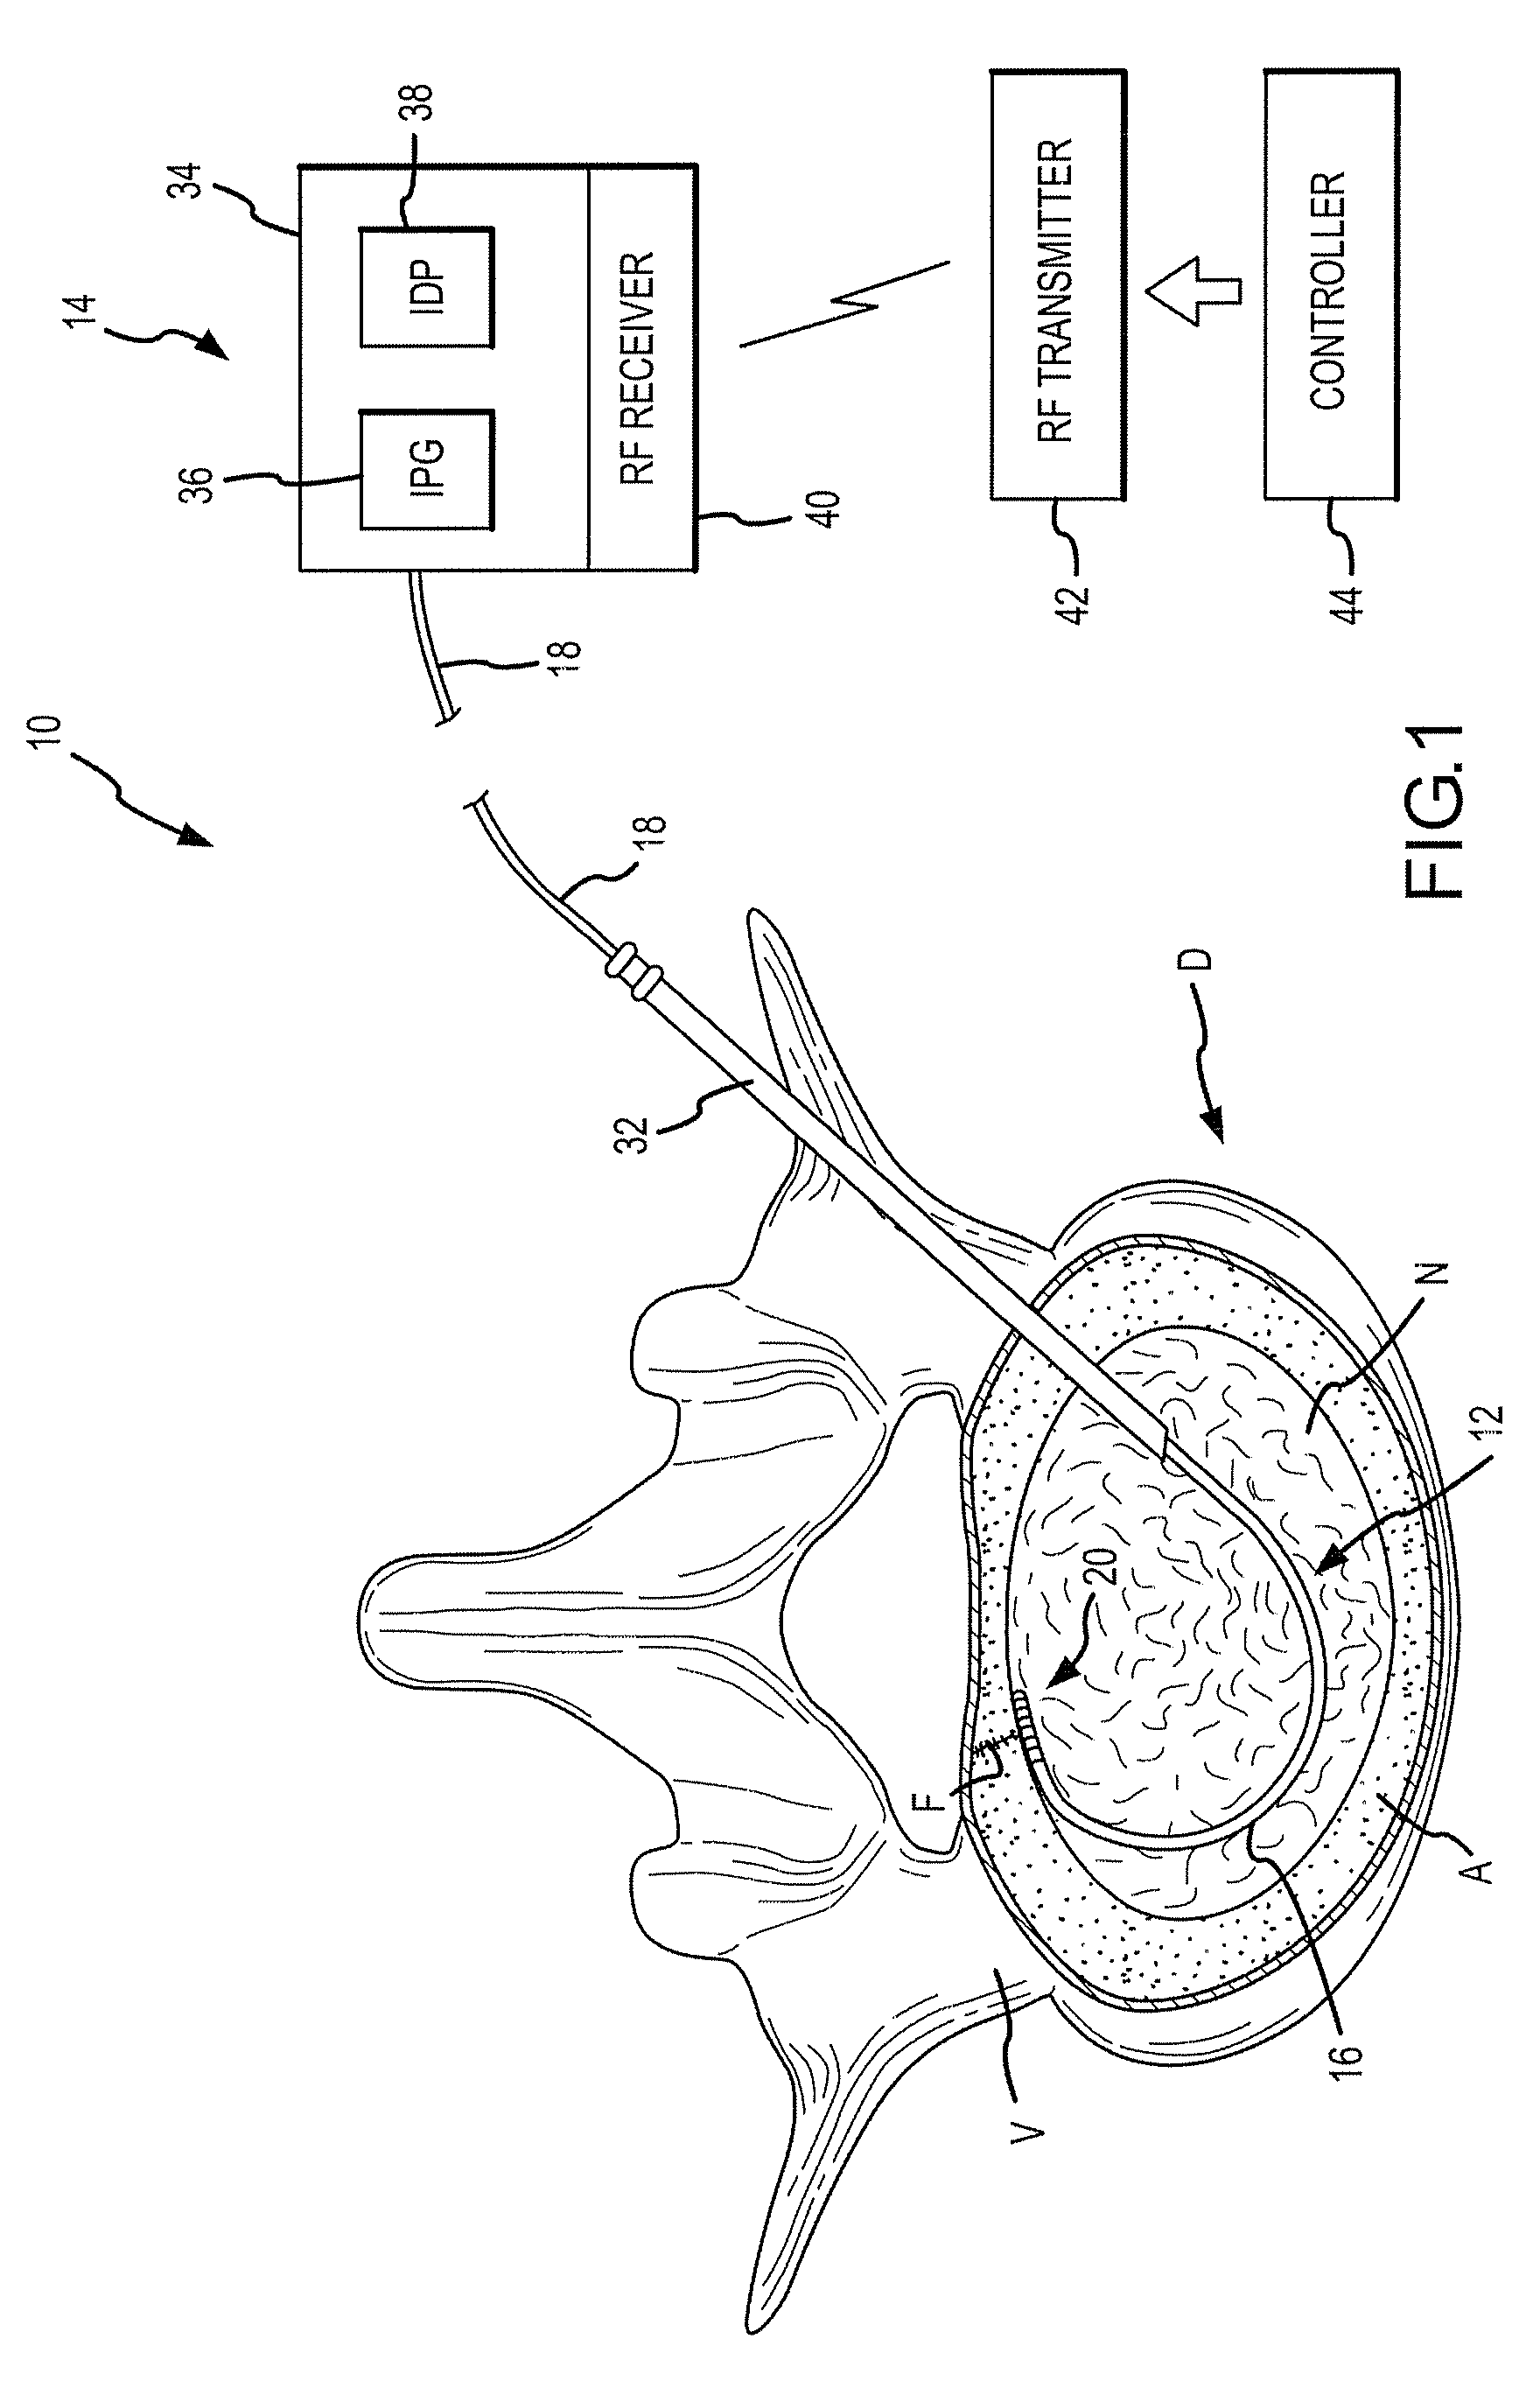 Combination electrical stimulating and infusion medical device and method